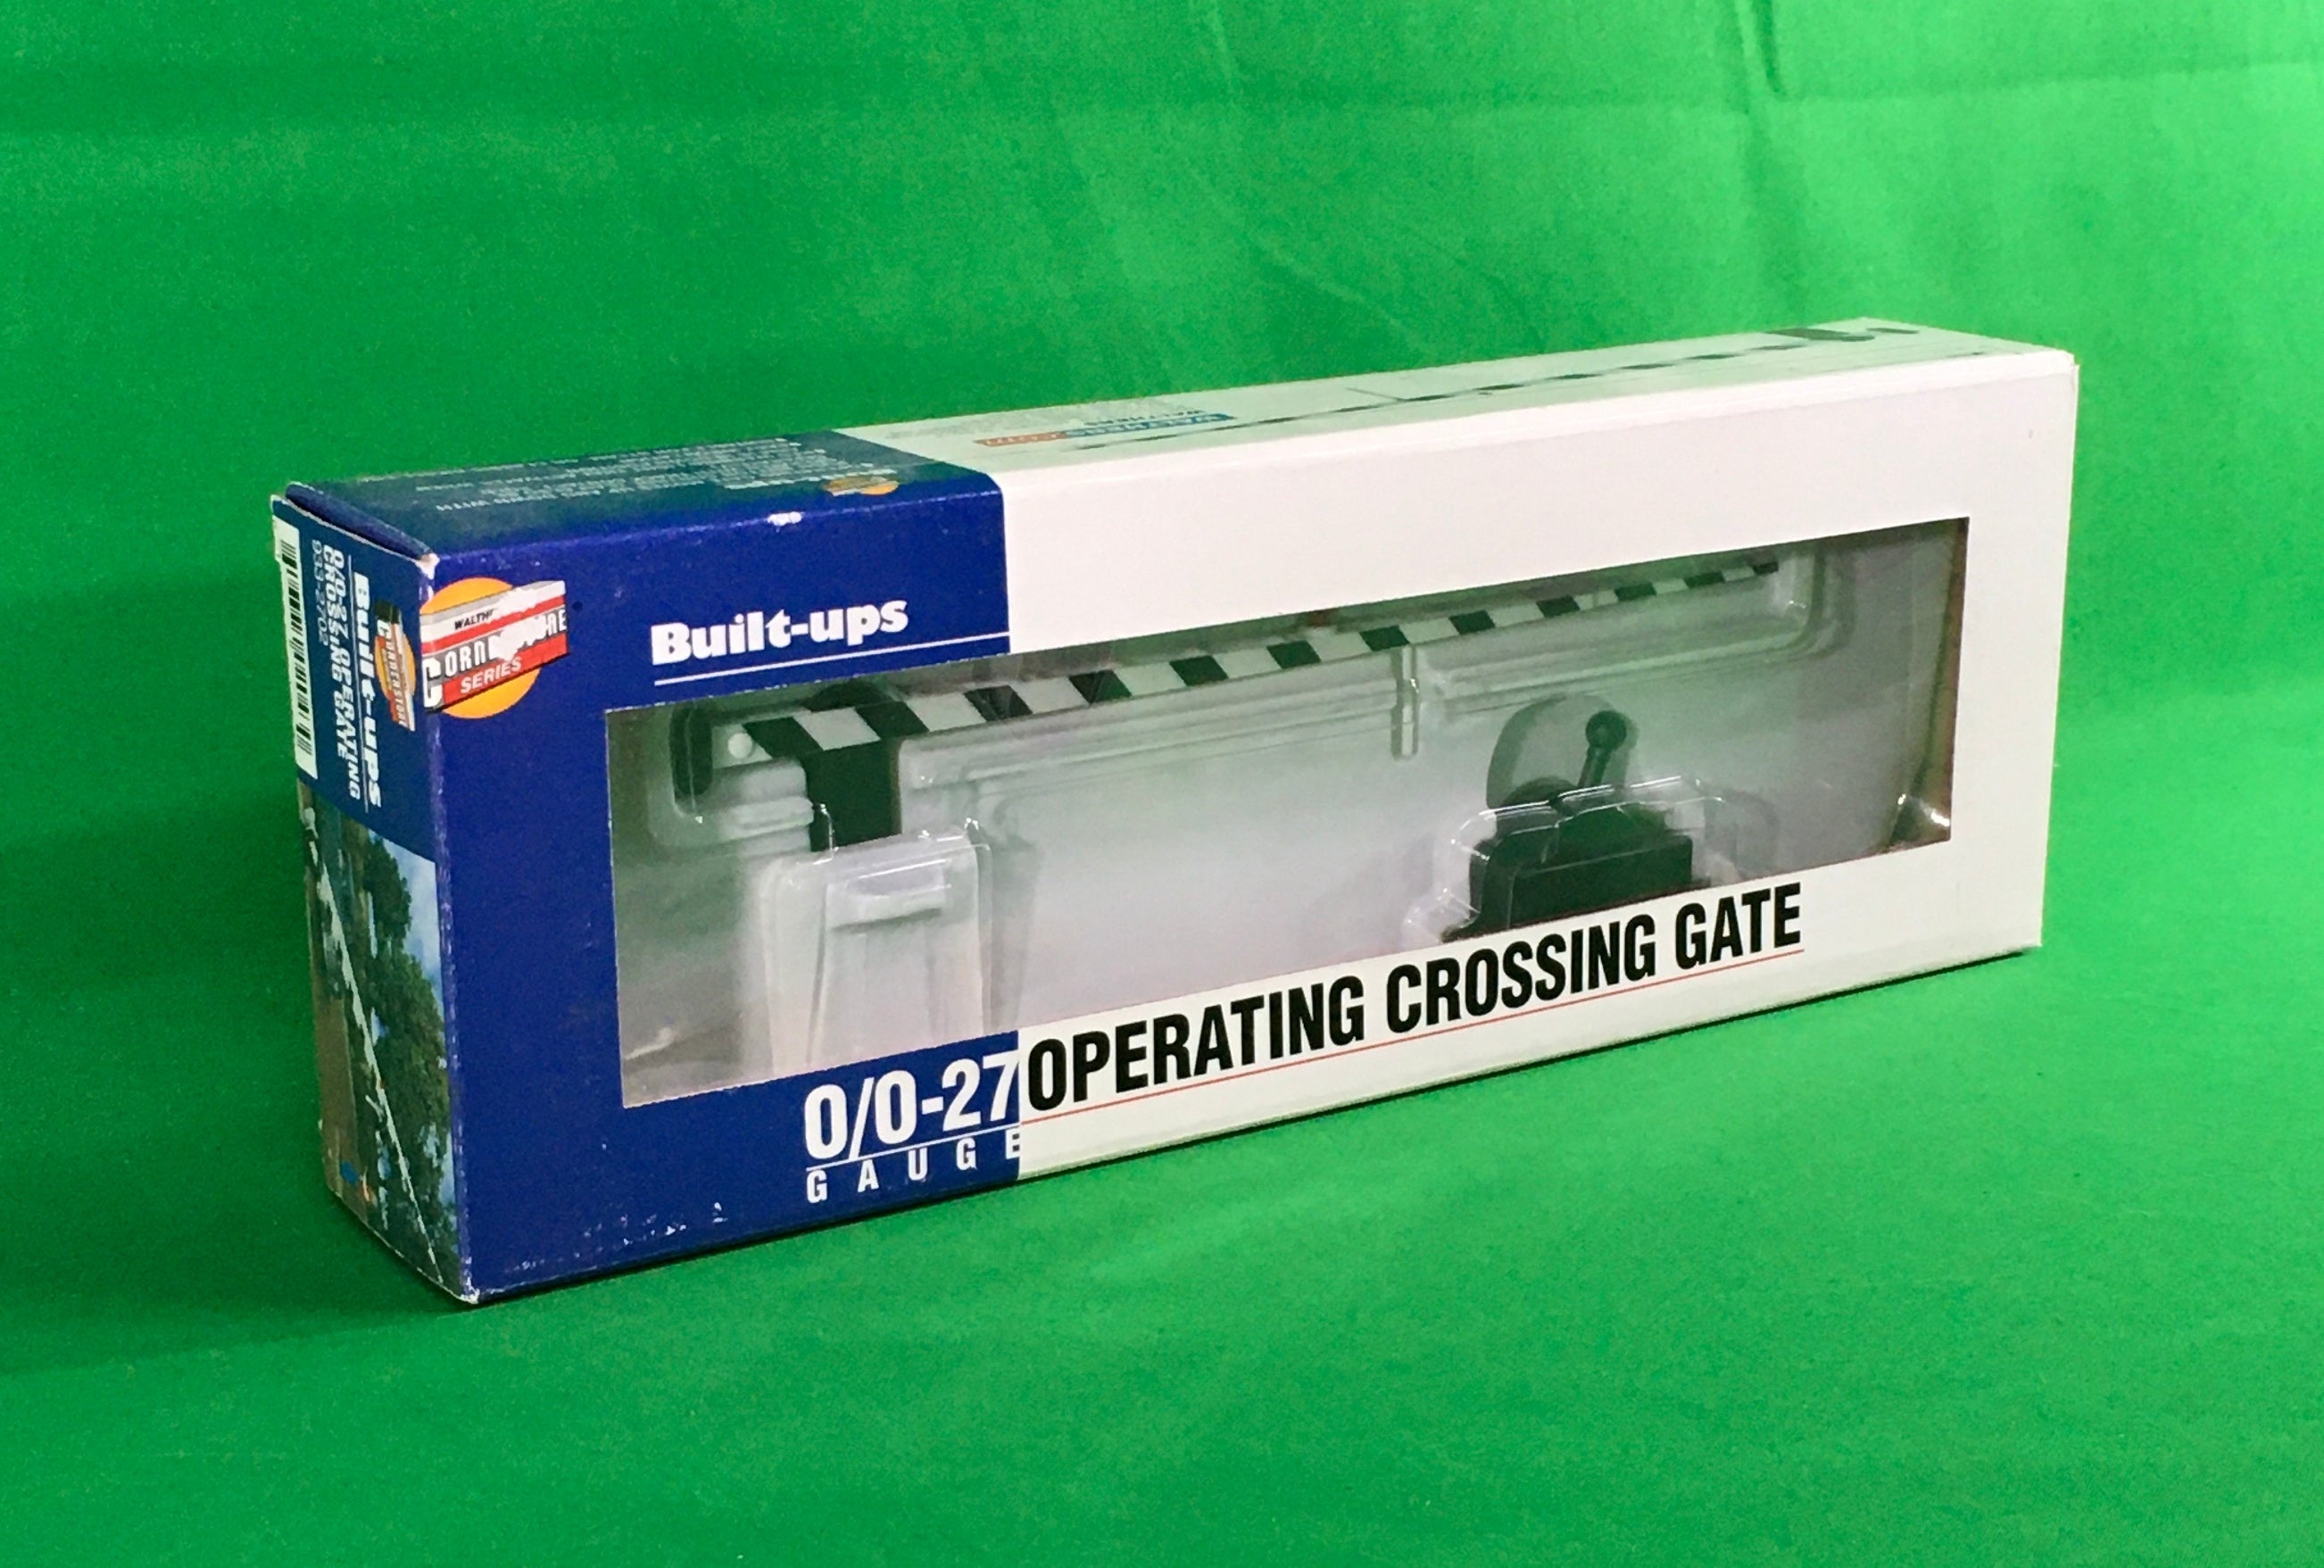 Walthers 933-2702 - Working Crossing Gate